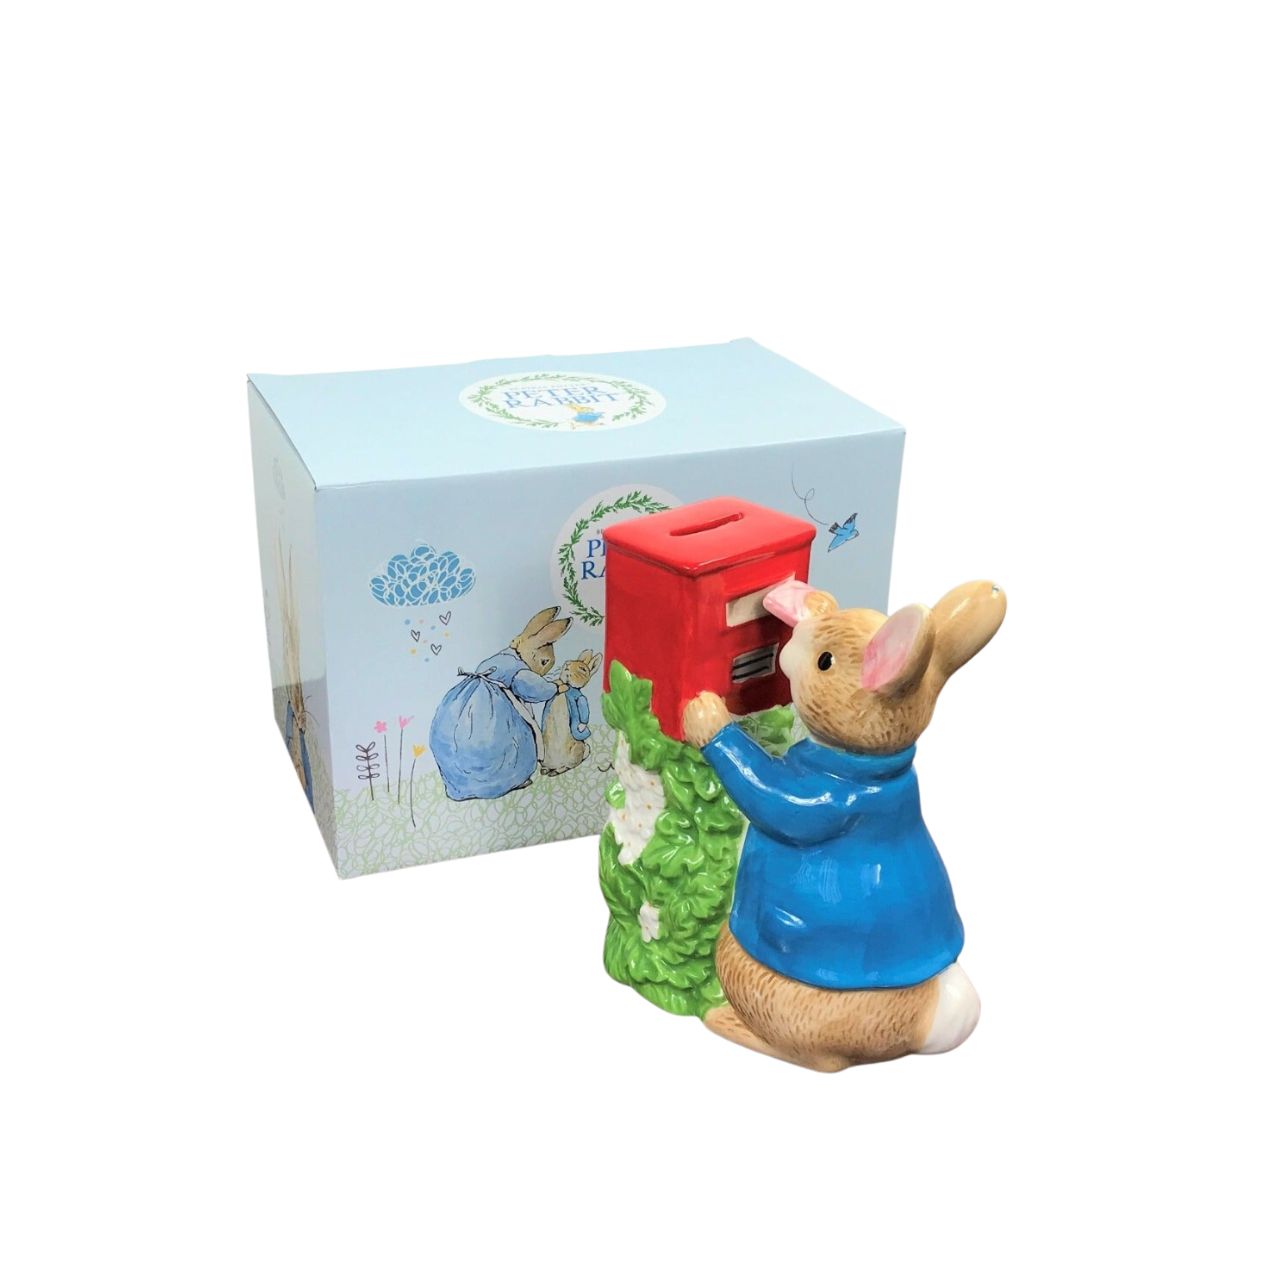 Beatrix Potter Peter Rabbit Posting a Letter Money Bank  A beautiful ceramic Peter Rabbit money bank, perfect for storing your pennies. The artwork is taken from the original illustrations from the Beatrix Potter stories. This Peter Rabbit money bank is sure to make a wonderful gift and comes presented in a branded gift box.